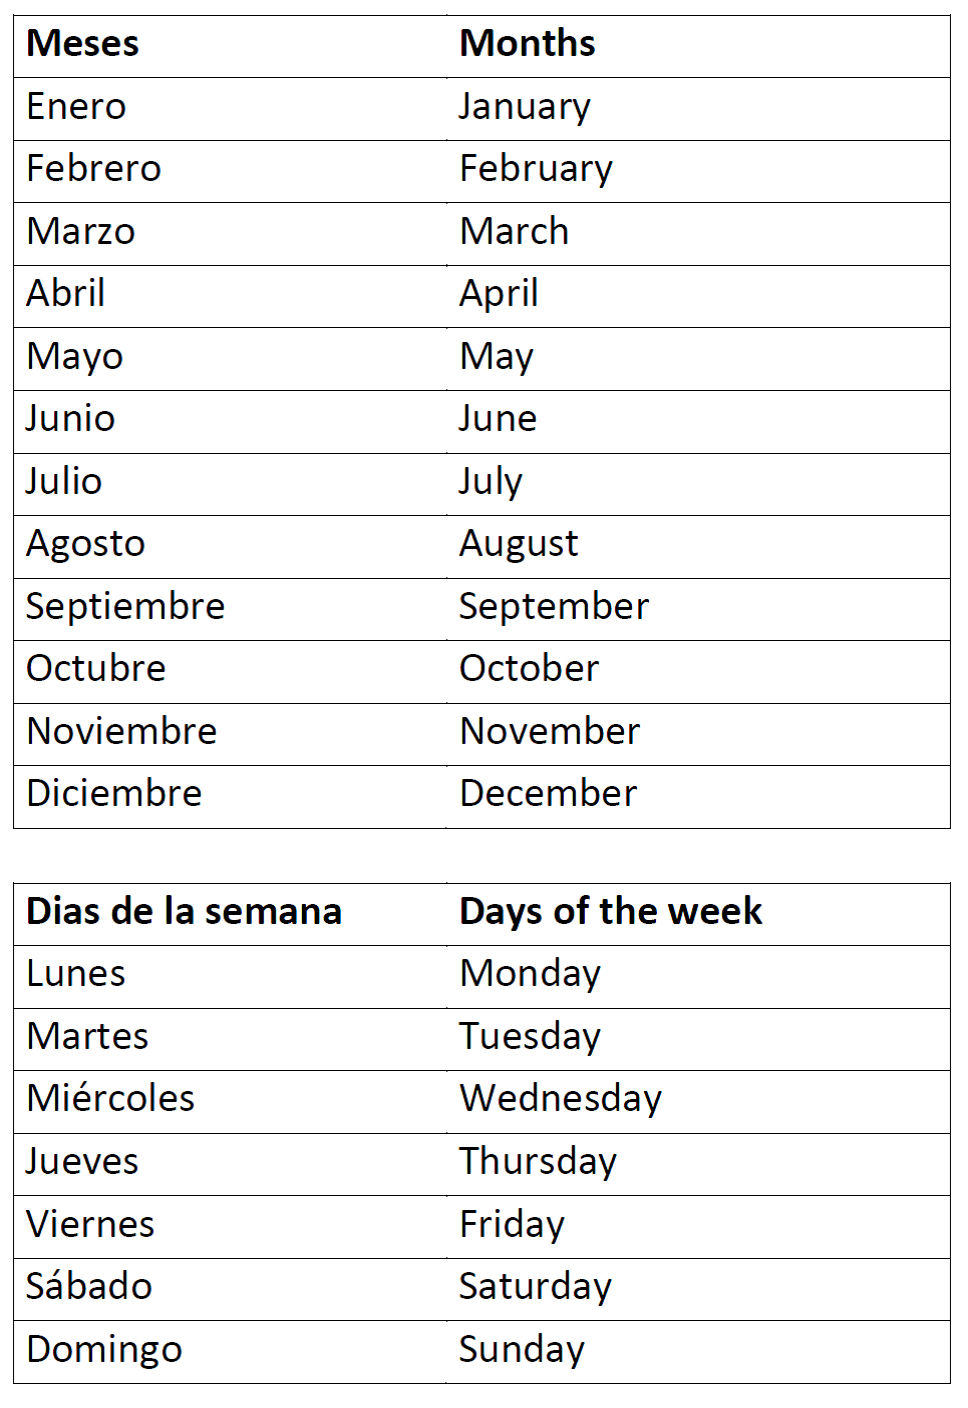 Months Of The Year And Days Of The Week | Tutoring- Spanish | Free Printable Spanish Worksheets Days Of The Week